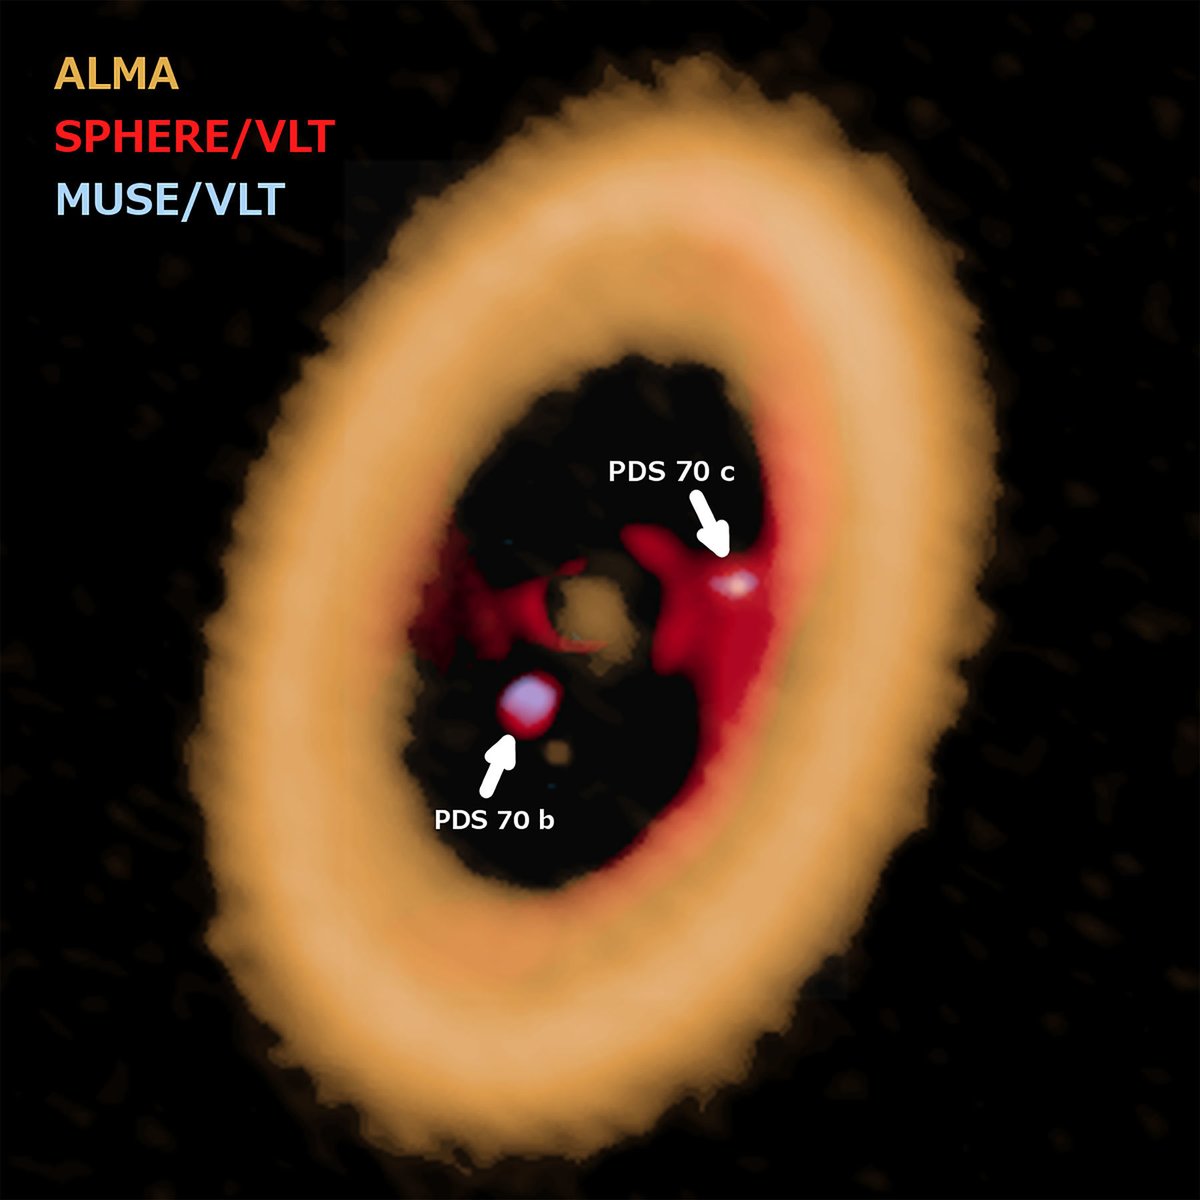 3/ PDS 70, where we still see the ring of material the star and planets are forming from… https://www.syfy.com/syfywire/alma-reveals-a-dusty-ring-around-a-young-exoplanet-that-may-be-forming-moons